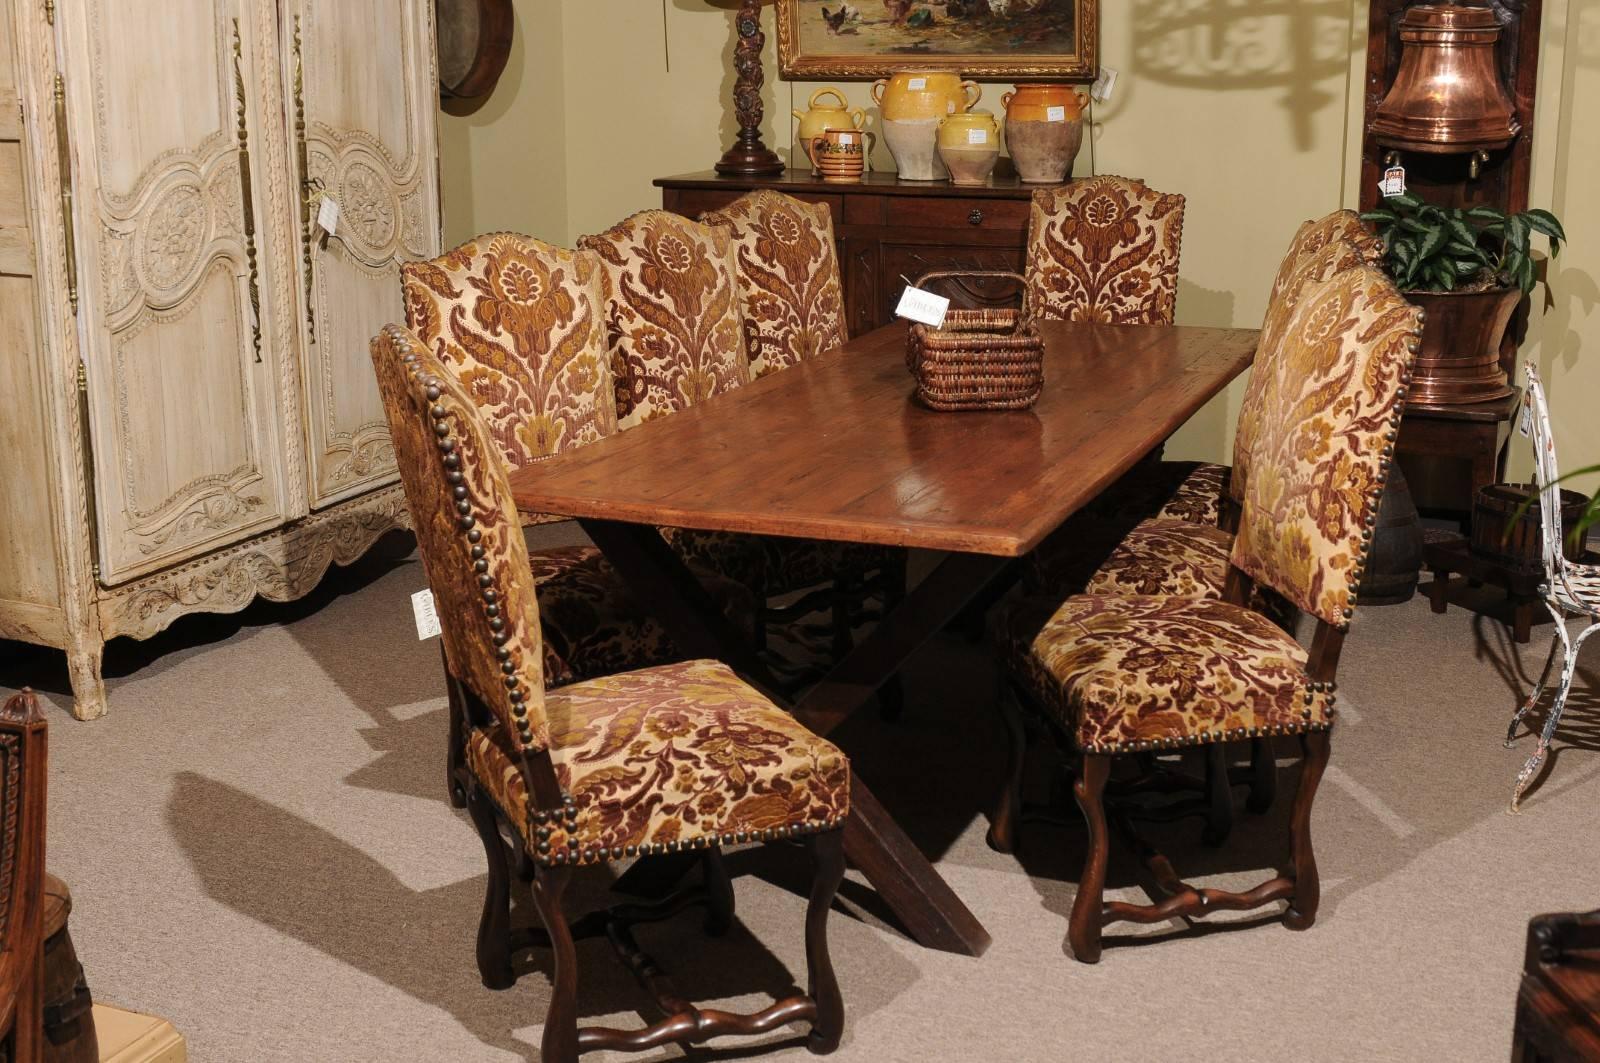 Set of eight Louis XIII style chairs from France

This style chairs is always popular, I think because there are so many different ways they can be upholstered. We have seen them done in casual linens, mohairs, dressy velvets or even leather seats